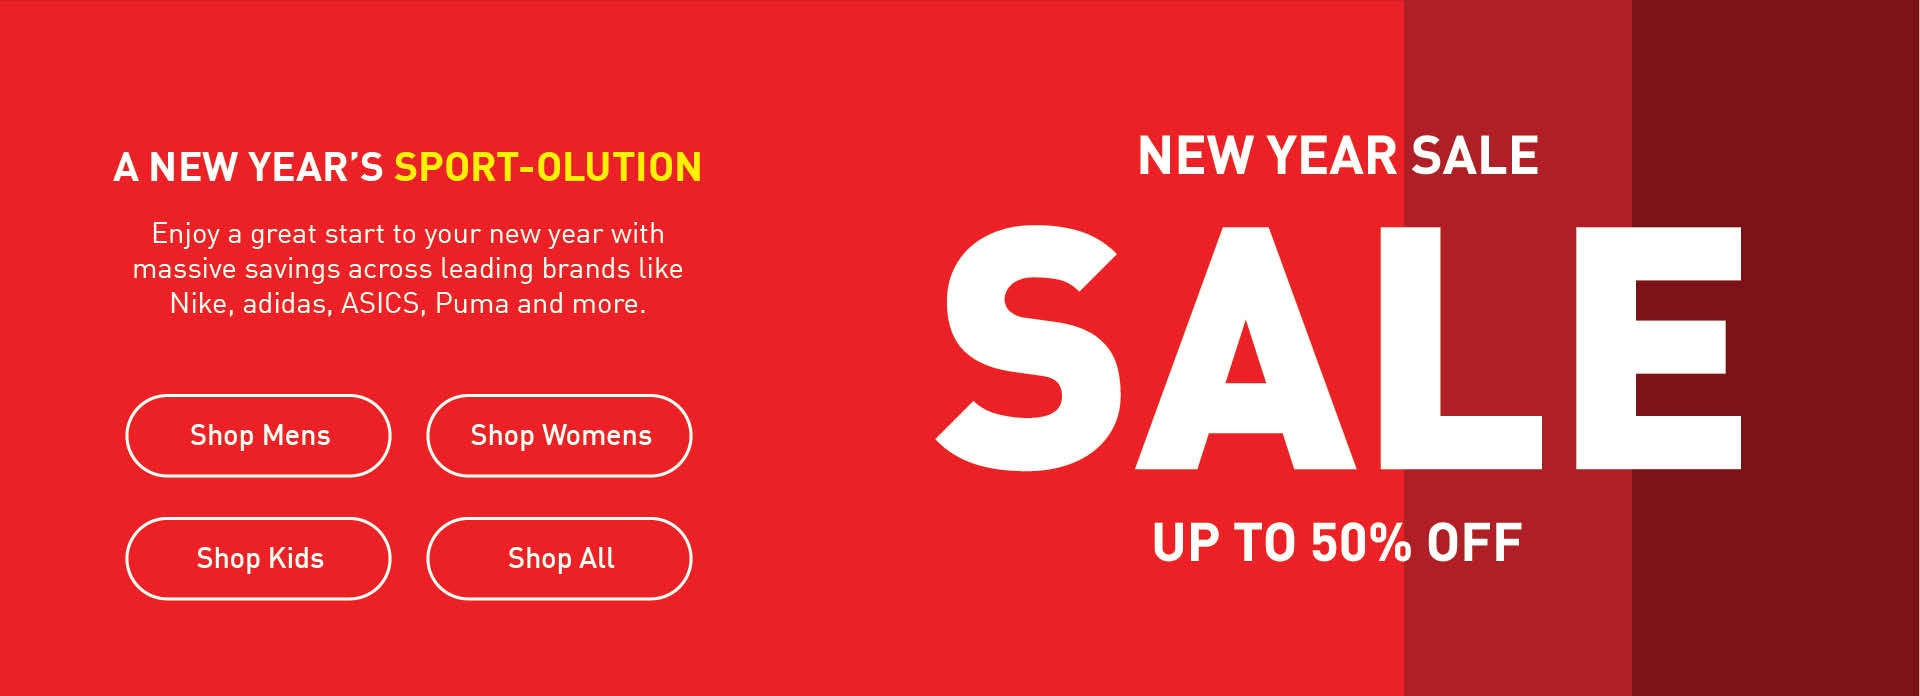 Shop the New Year Sale